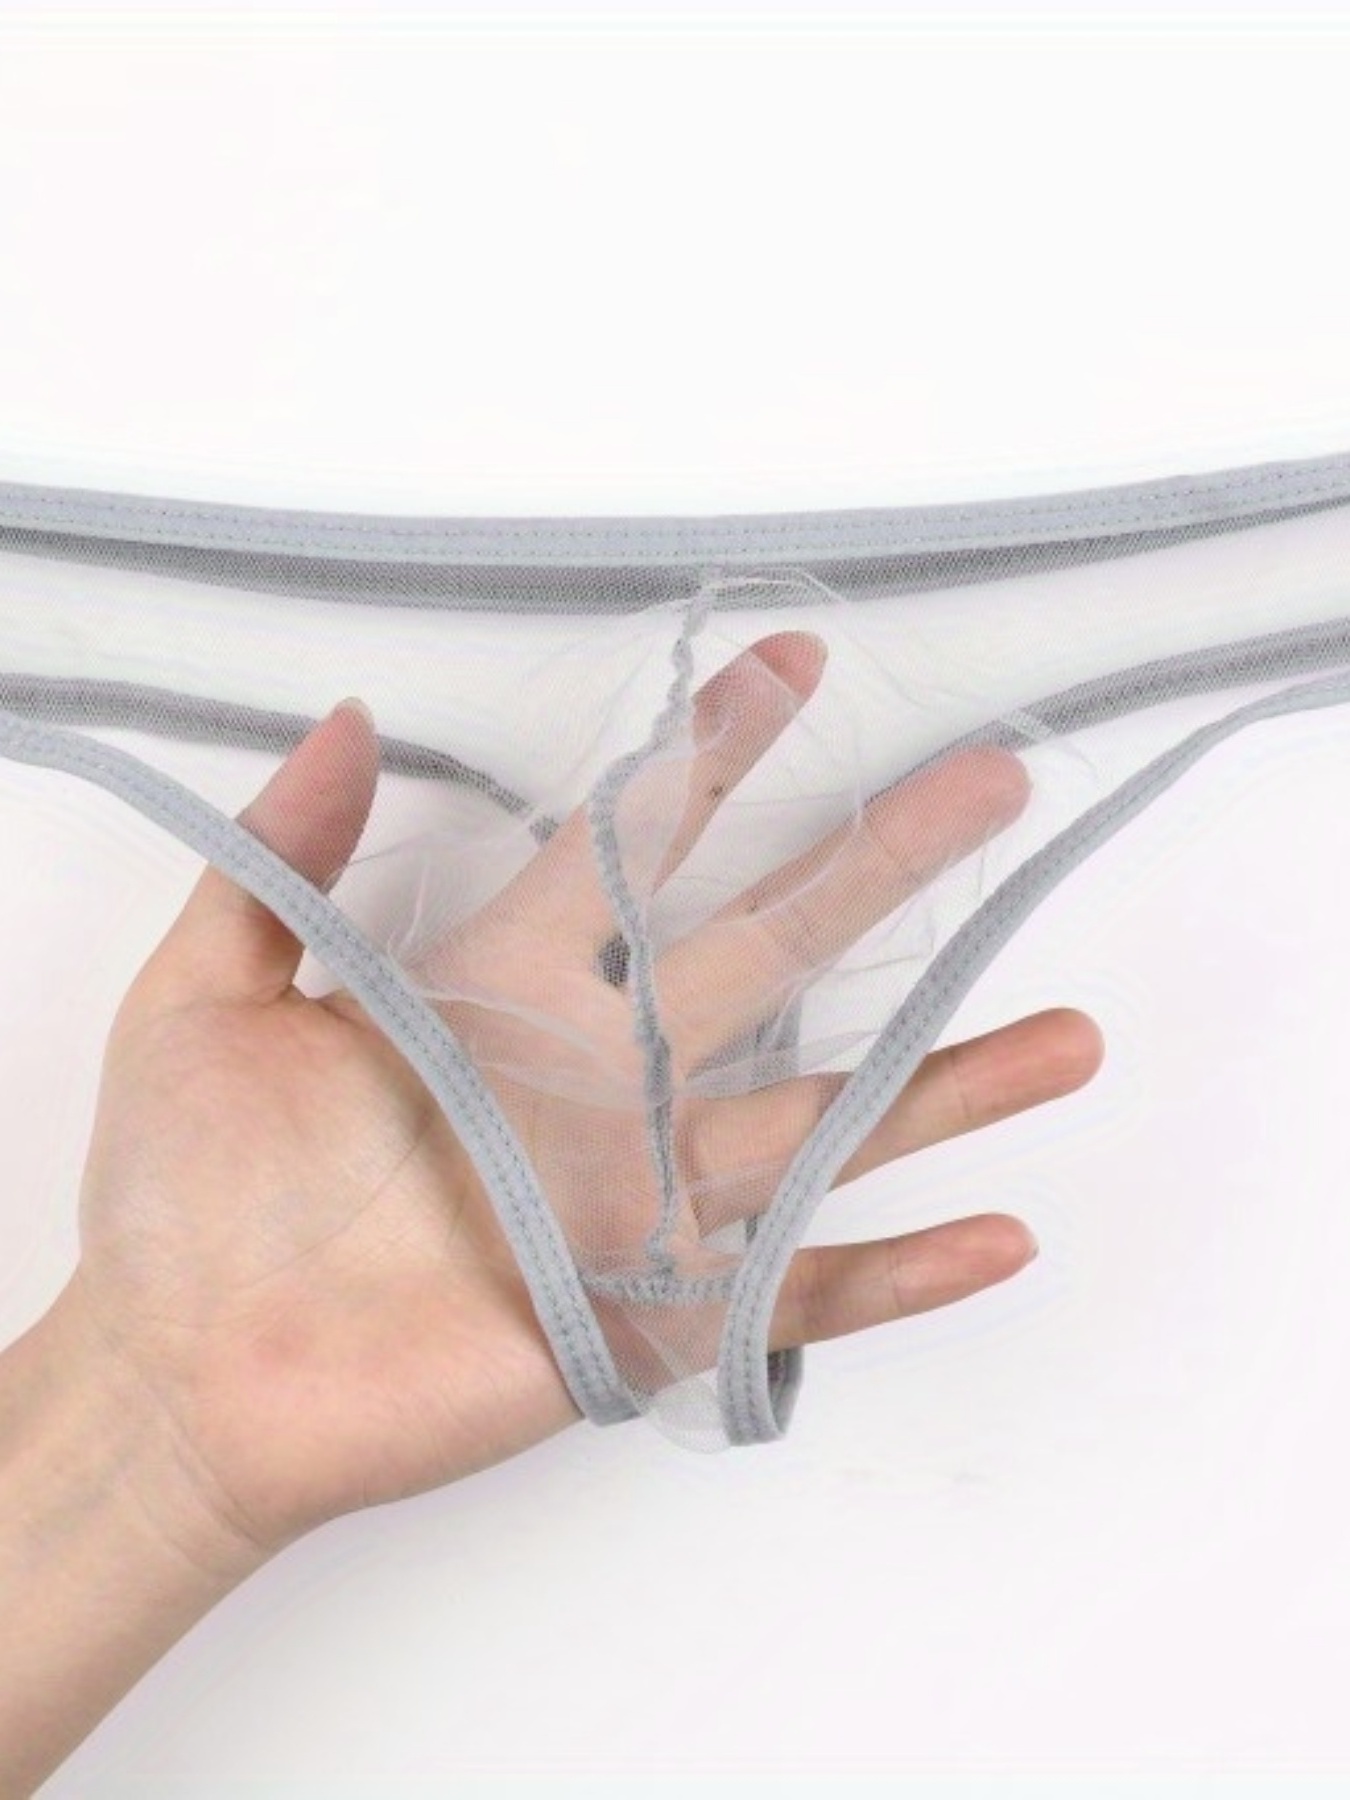 Best Deal for G String Thongs For Women Sexy See Through Underwear Low